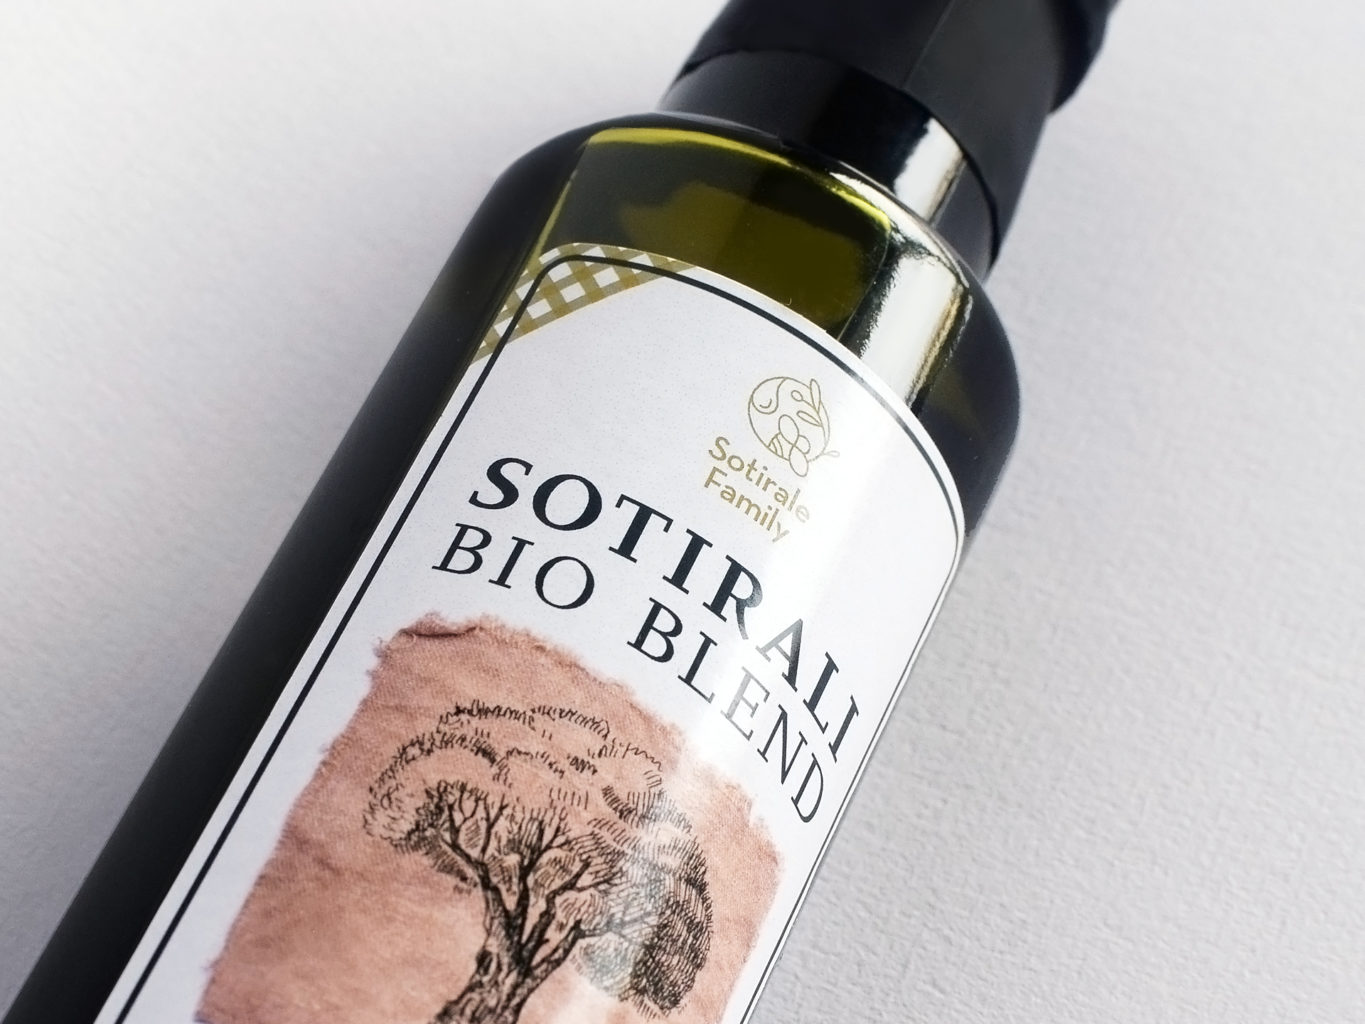 Sotirale Family extra virgin olive oil packaging